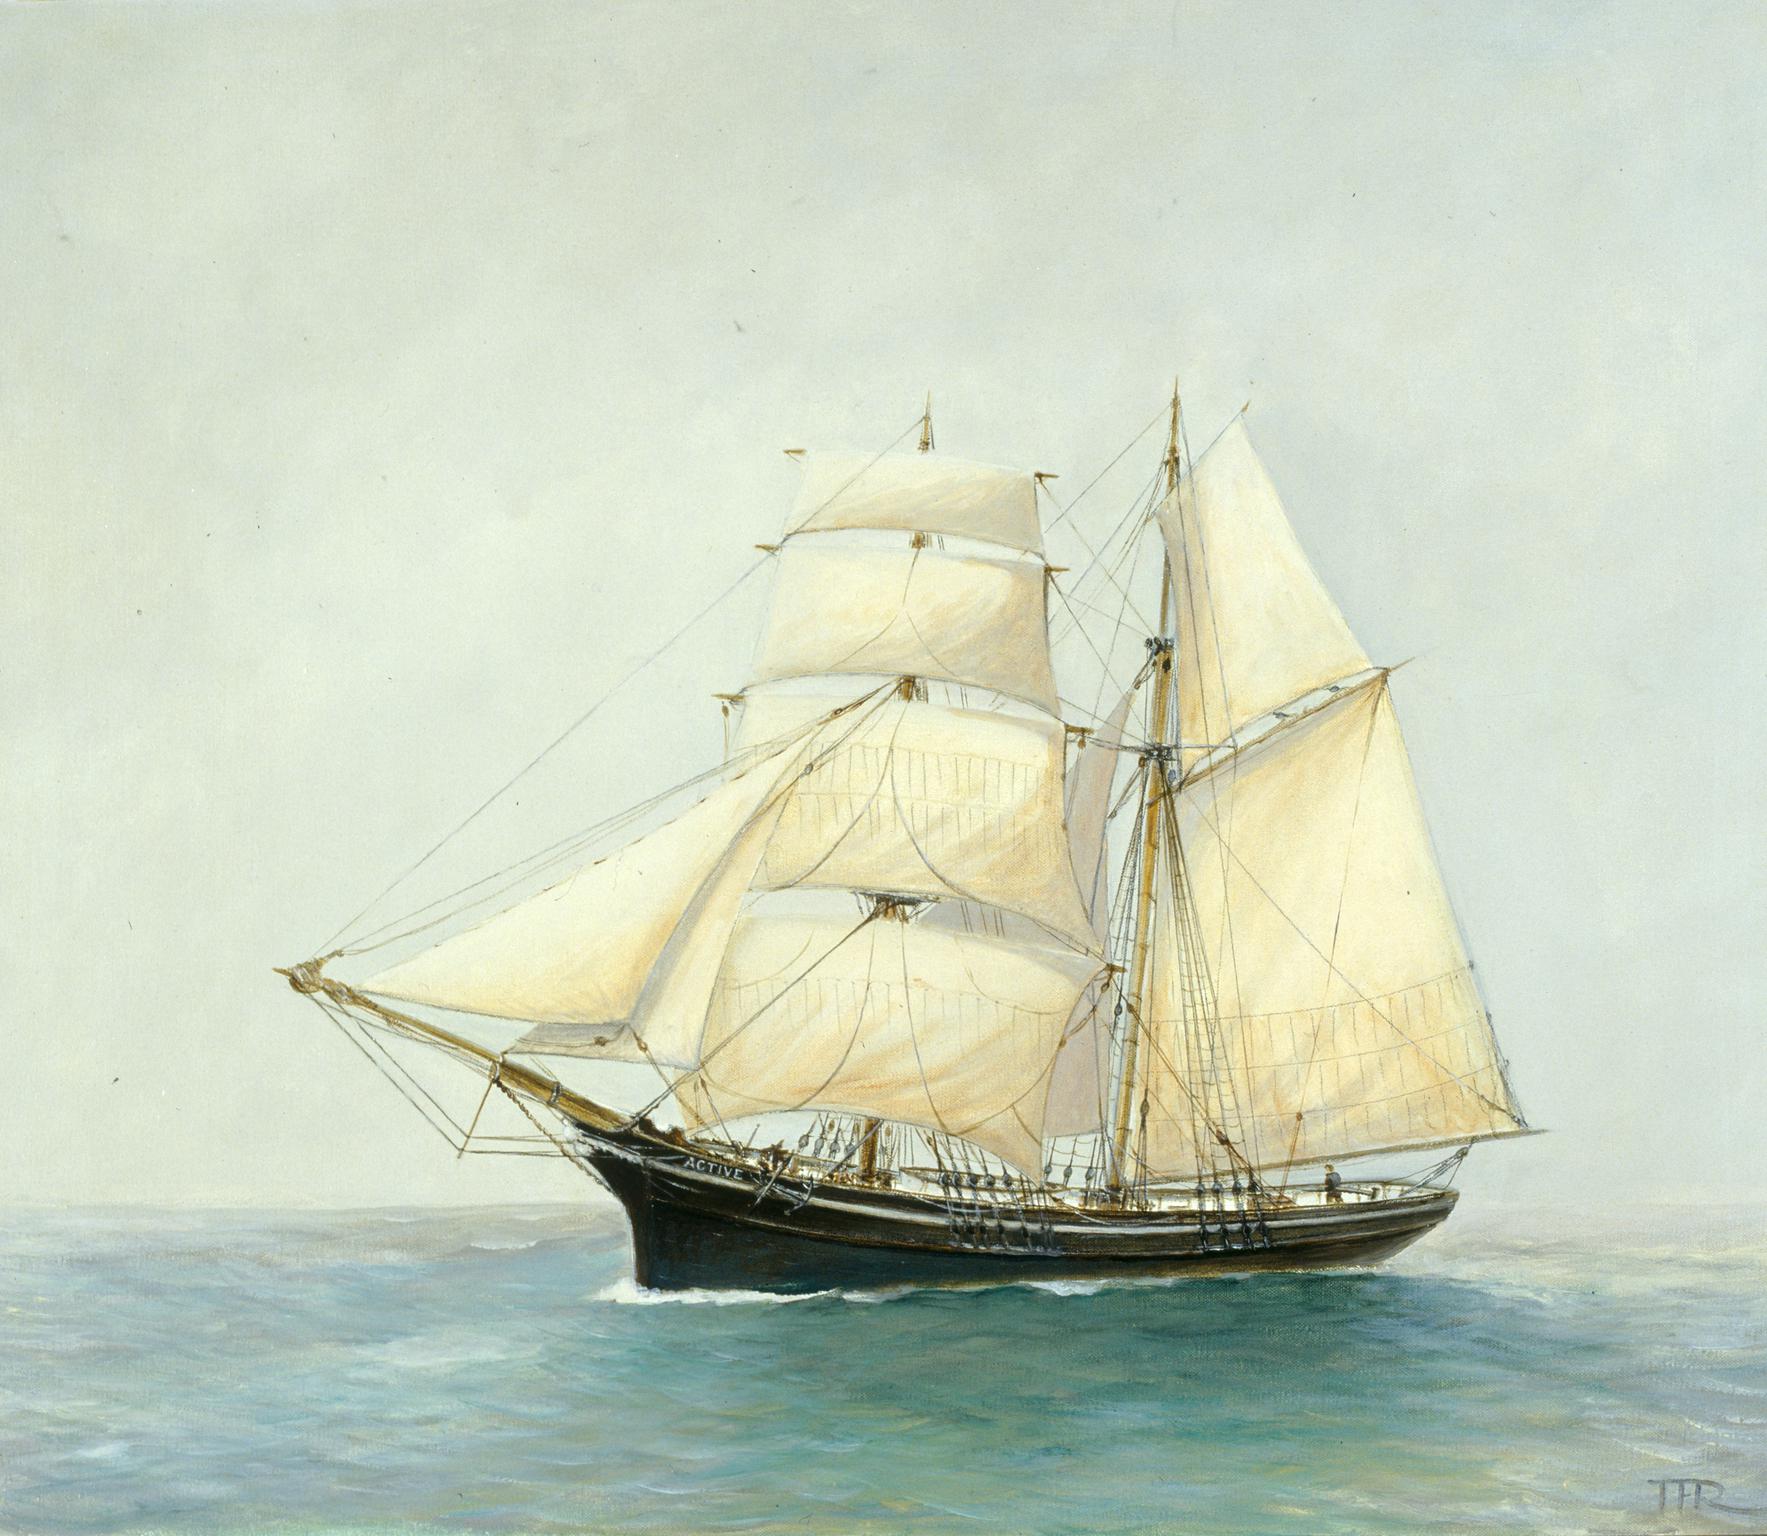 The Brigantine ACTIVE of Newquay (painting)